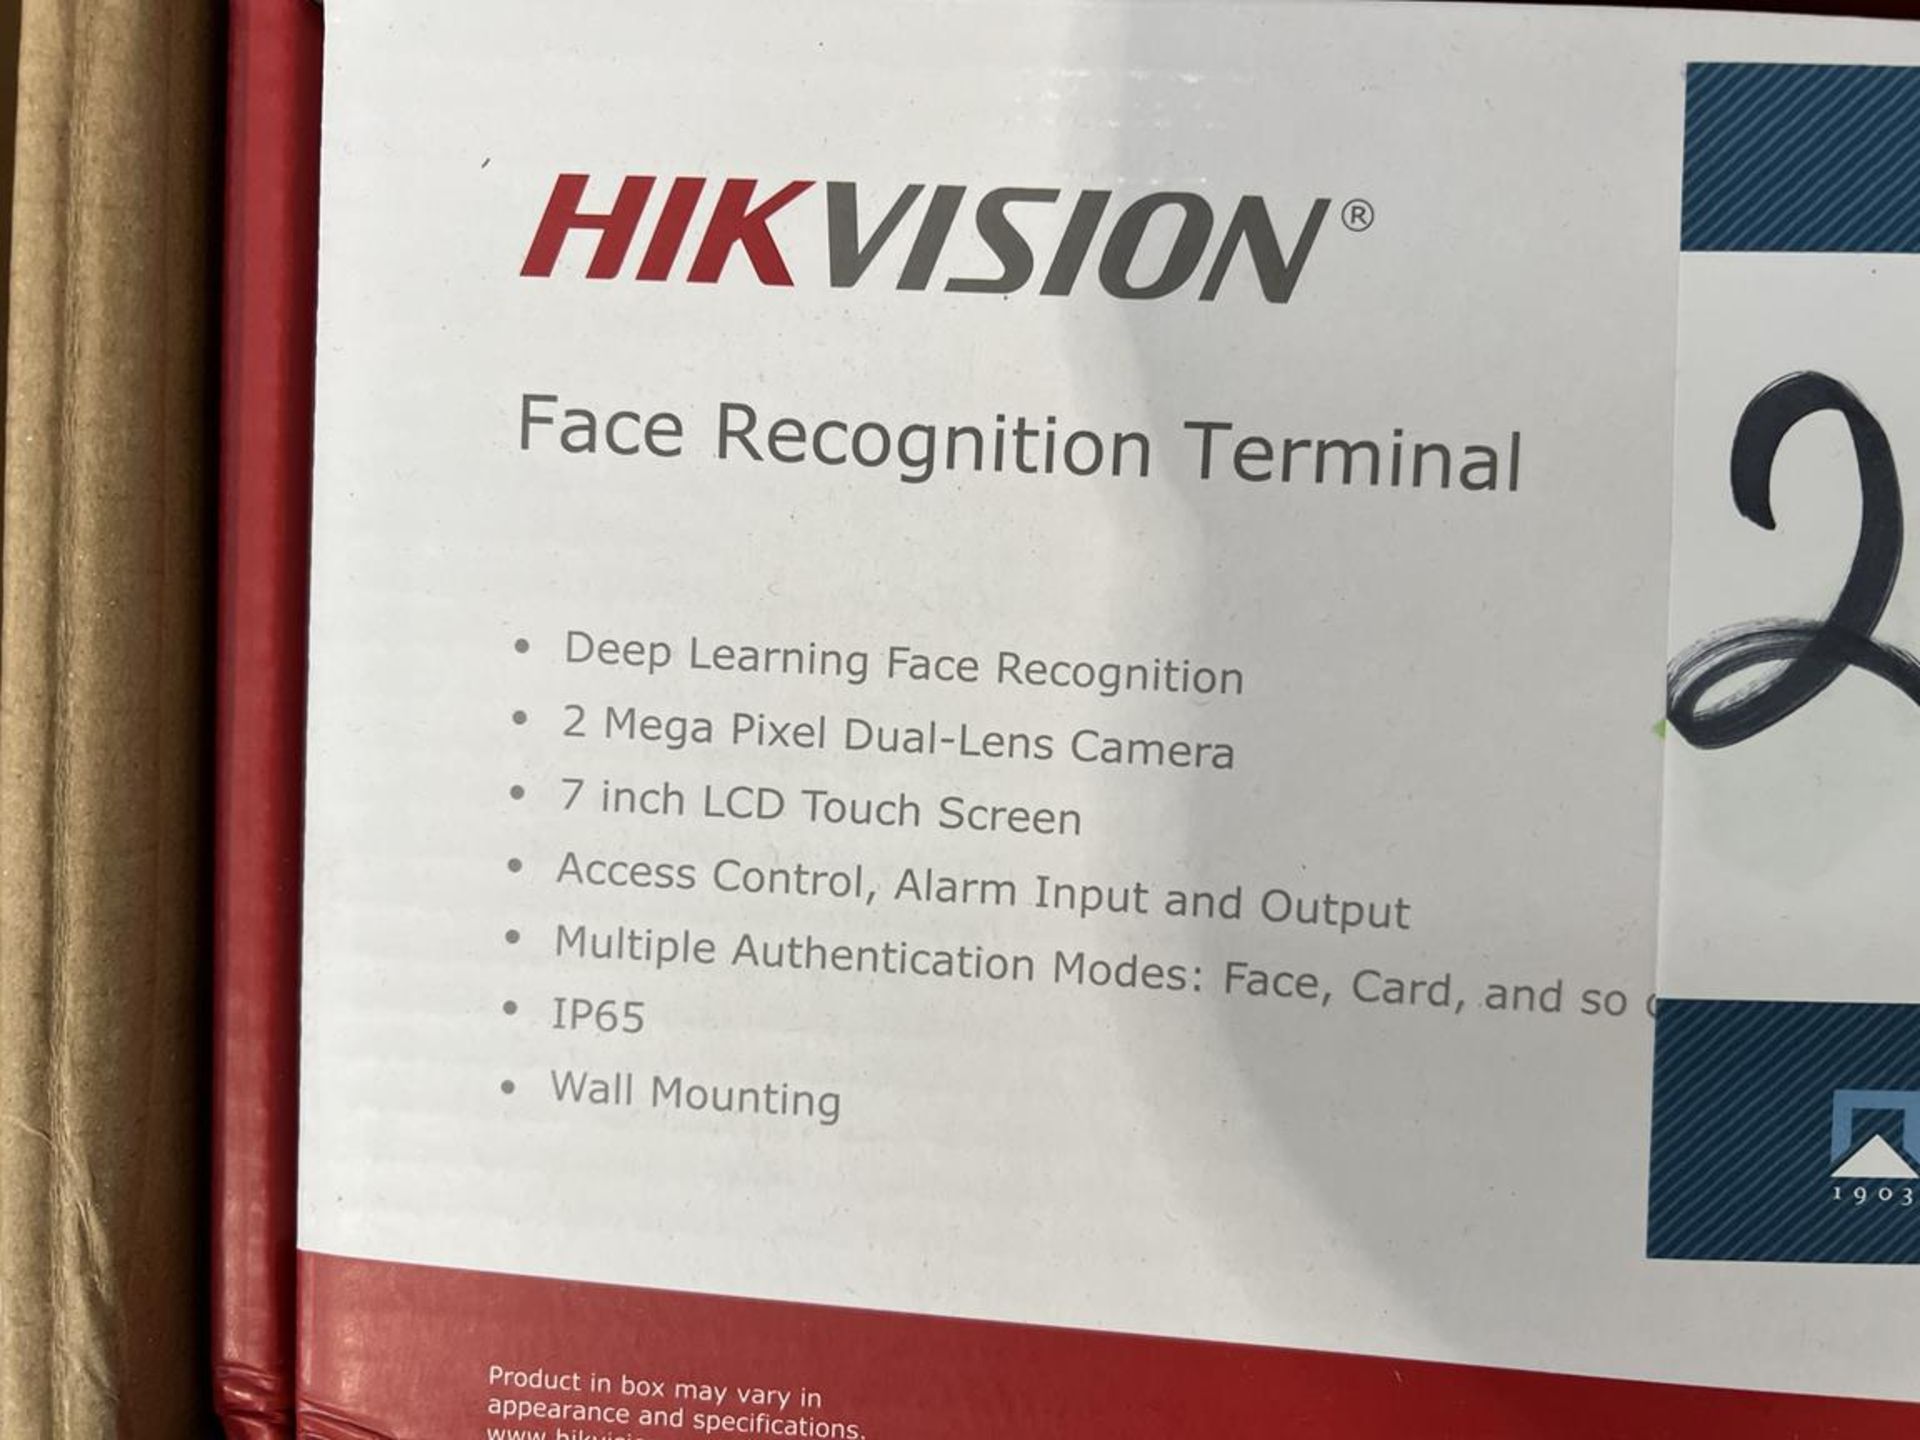 8x (no.) Hik face recognition terminals - Image 3 of 4